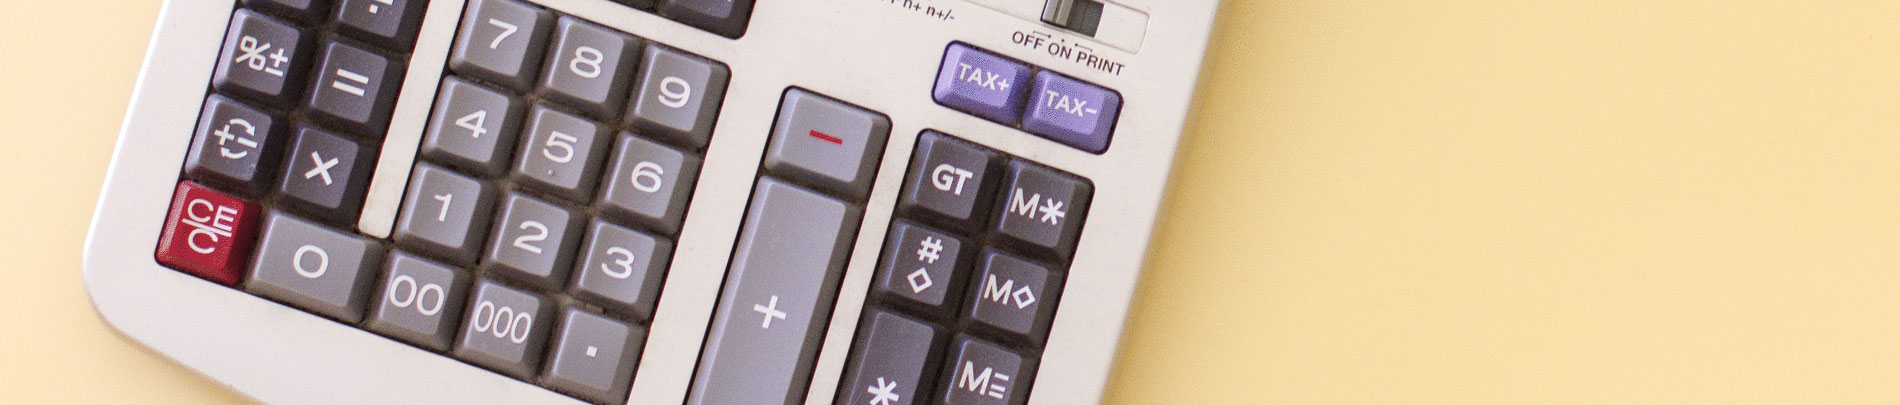 A top down view of a calculator on a table.